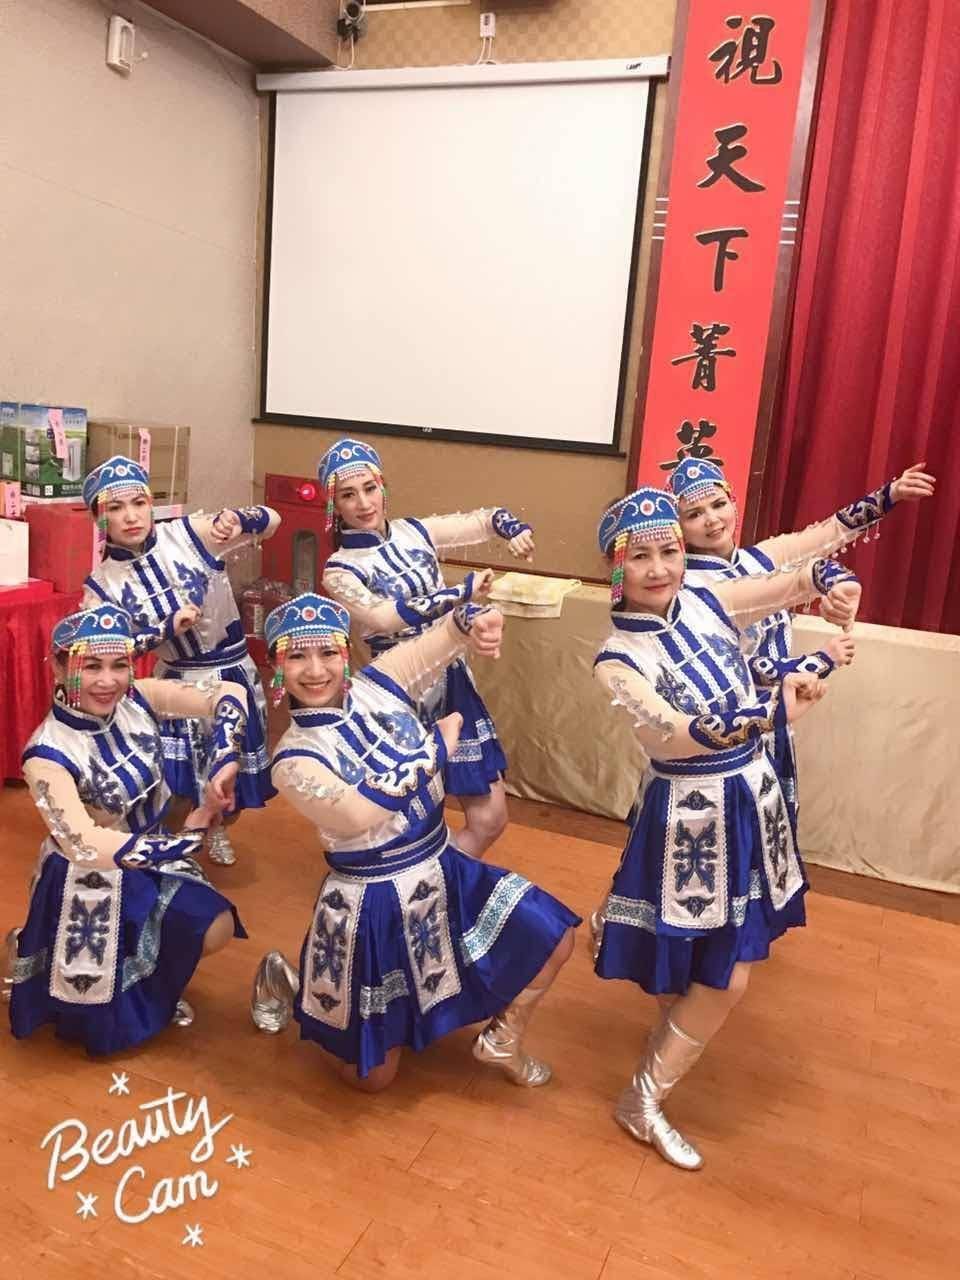 Another special performance by Wudong Xinxuan Dance Group